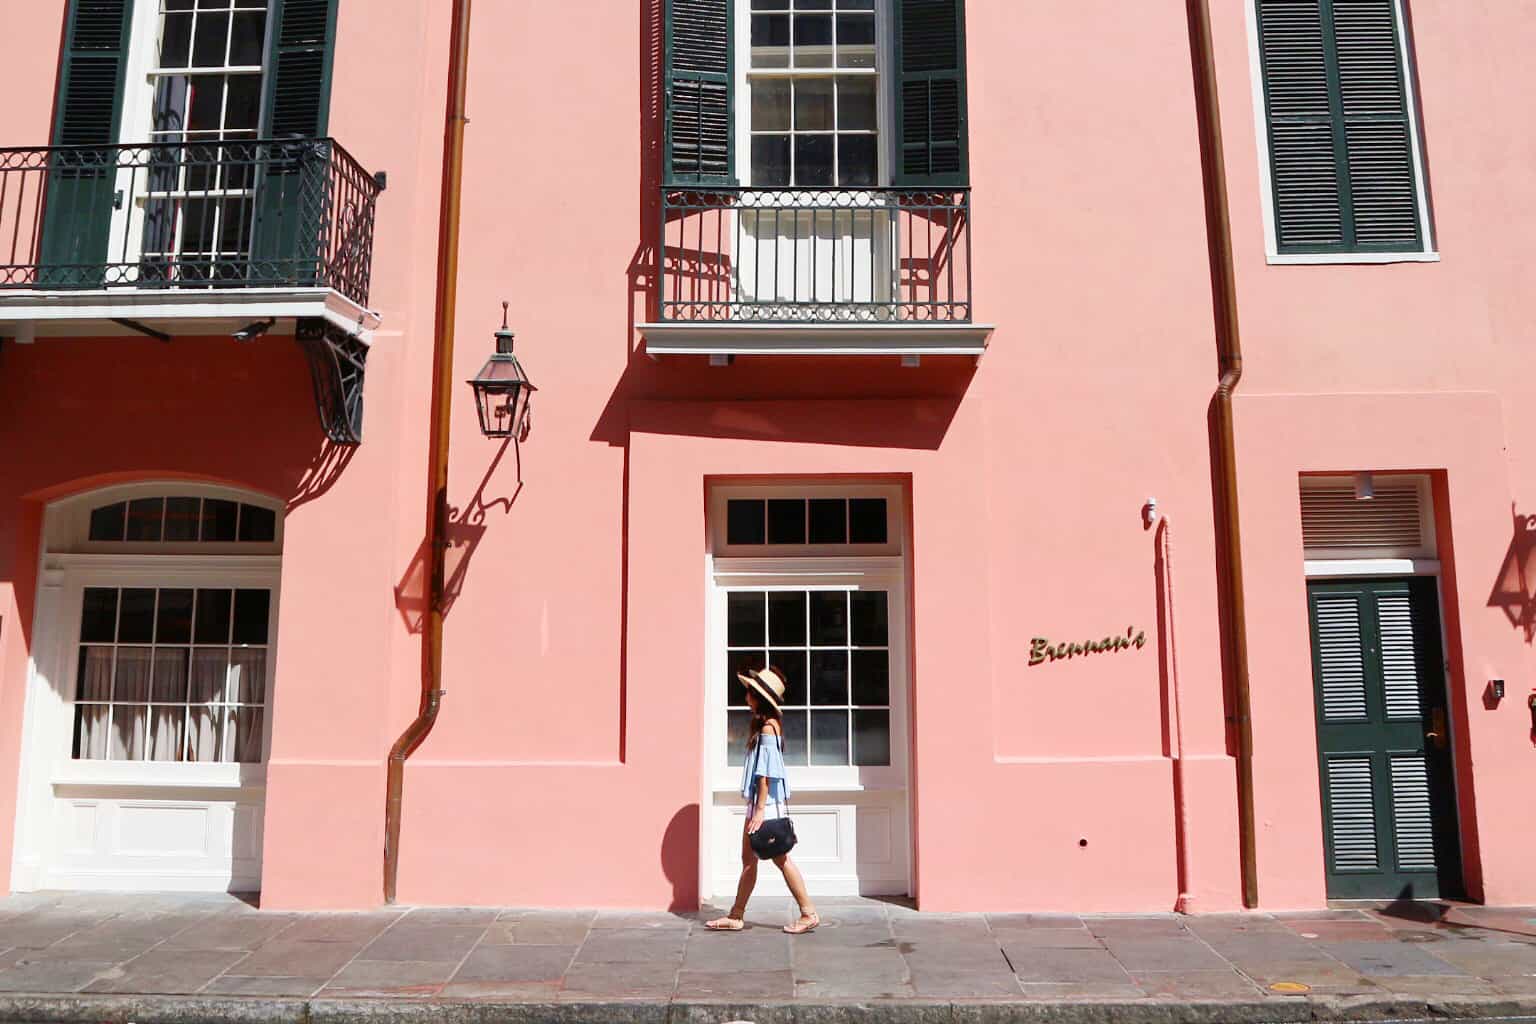 New Orleans City Guide – Where To Eat, Stay & Shop In French Quarter